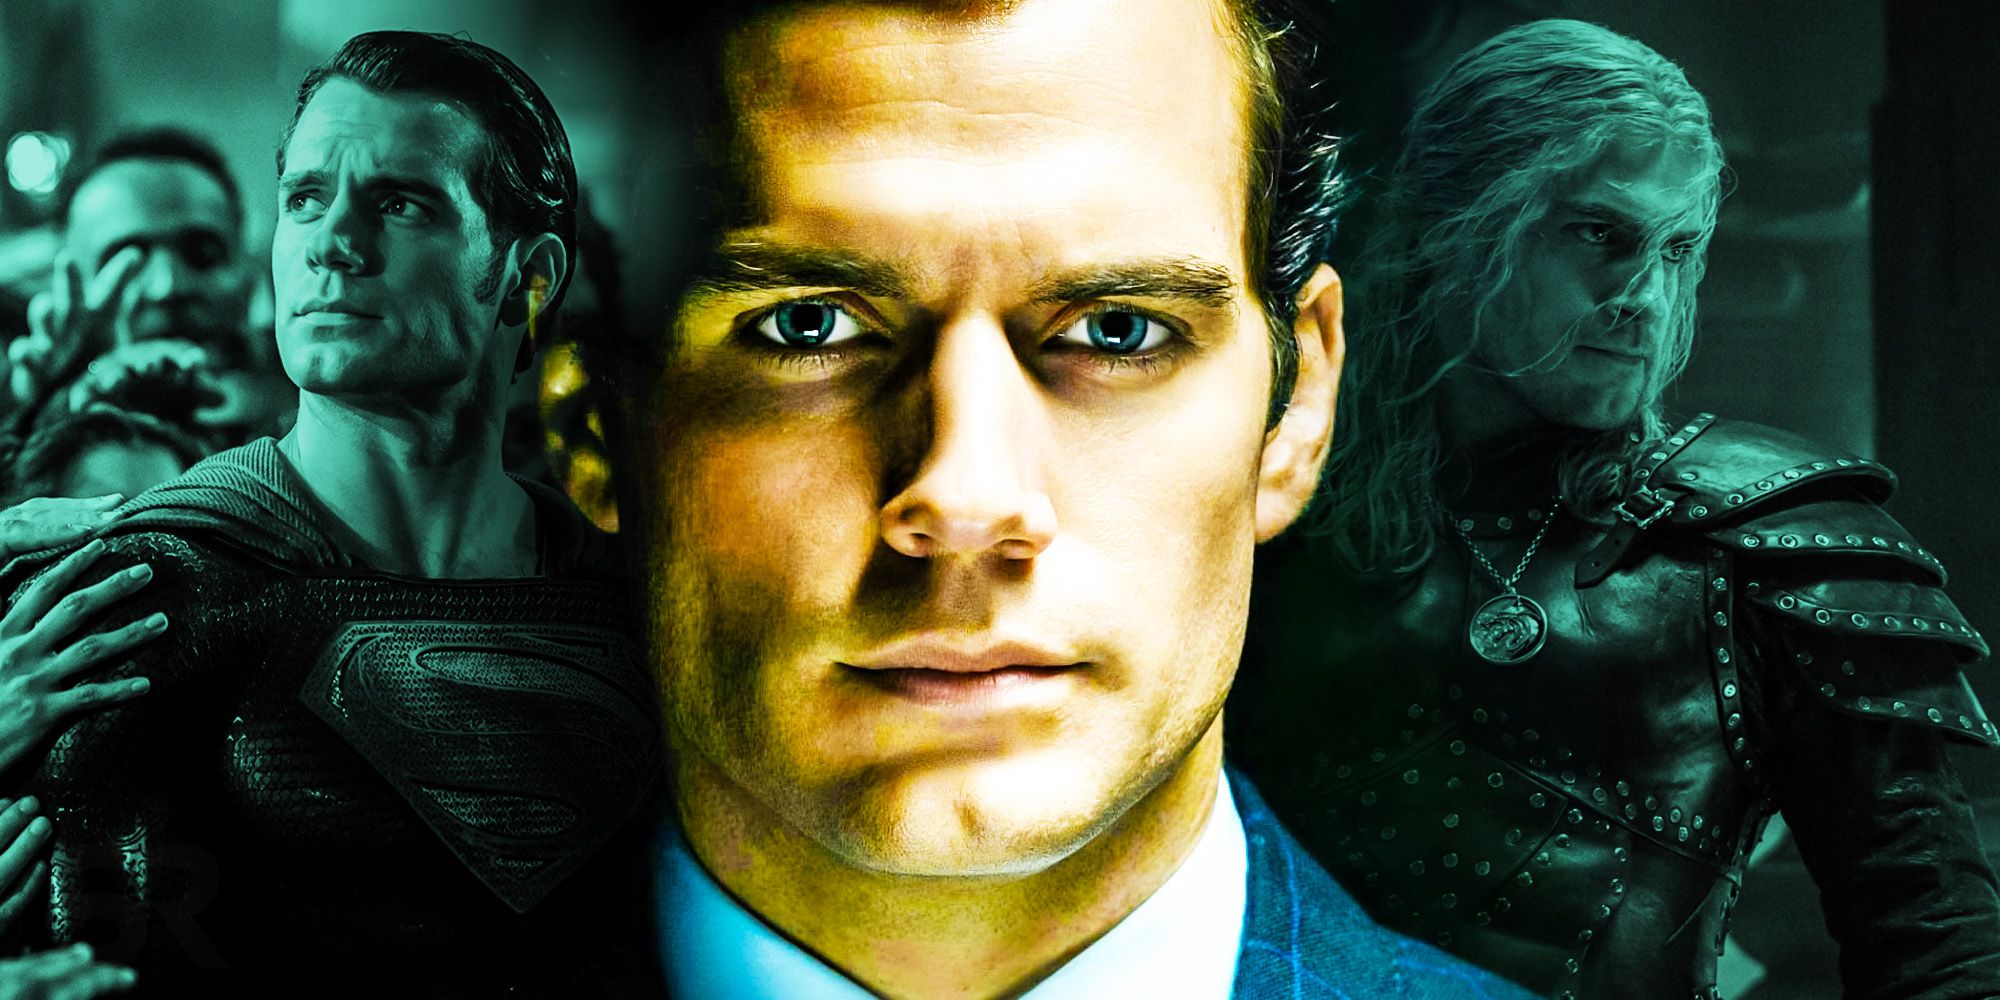 Henry Cavill Ditching Superman for 'The Witcher' Series Is Super